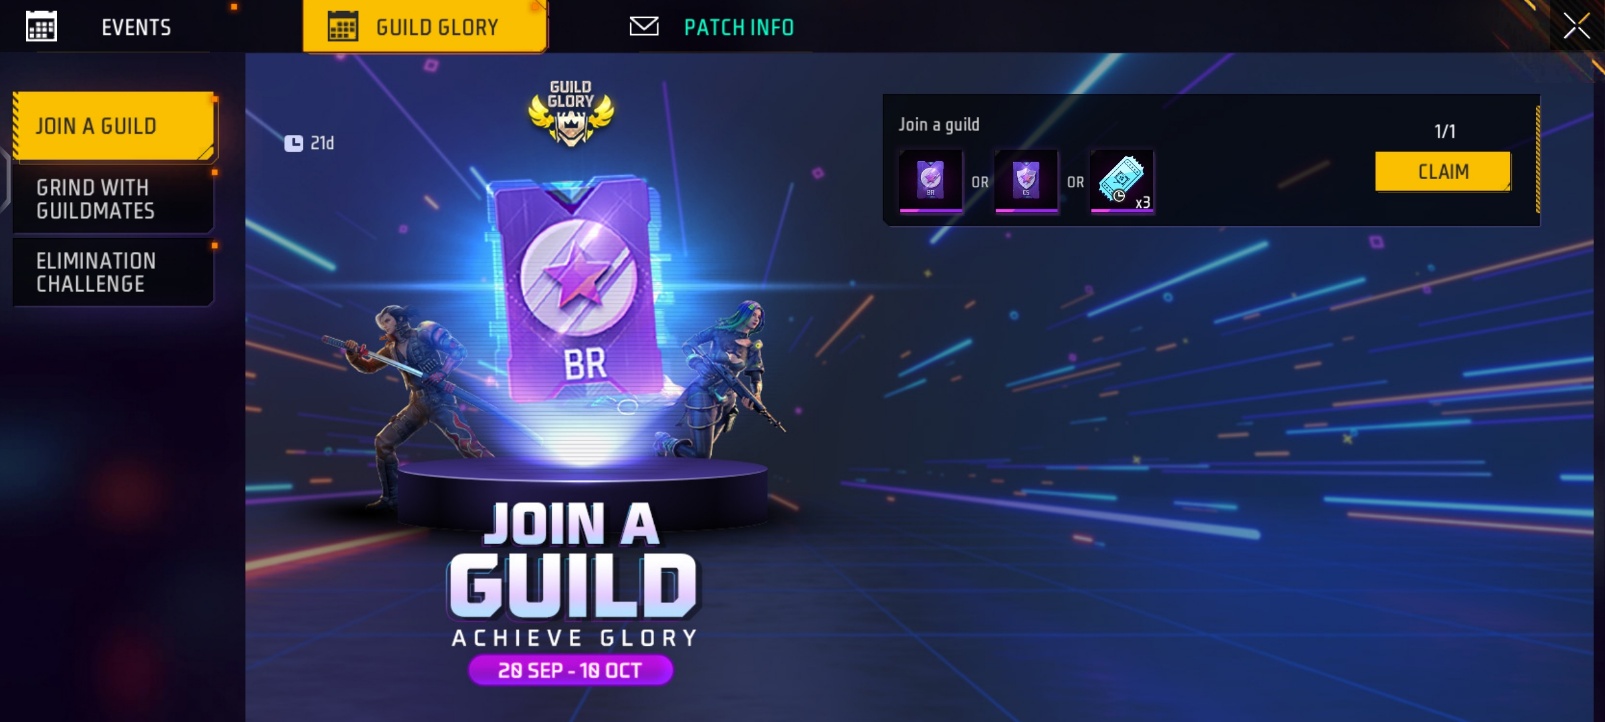 Join A Guild In Free Fire For Free Rewards